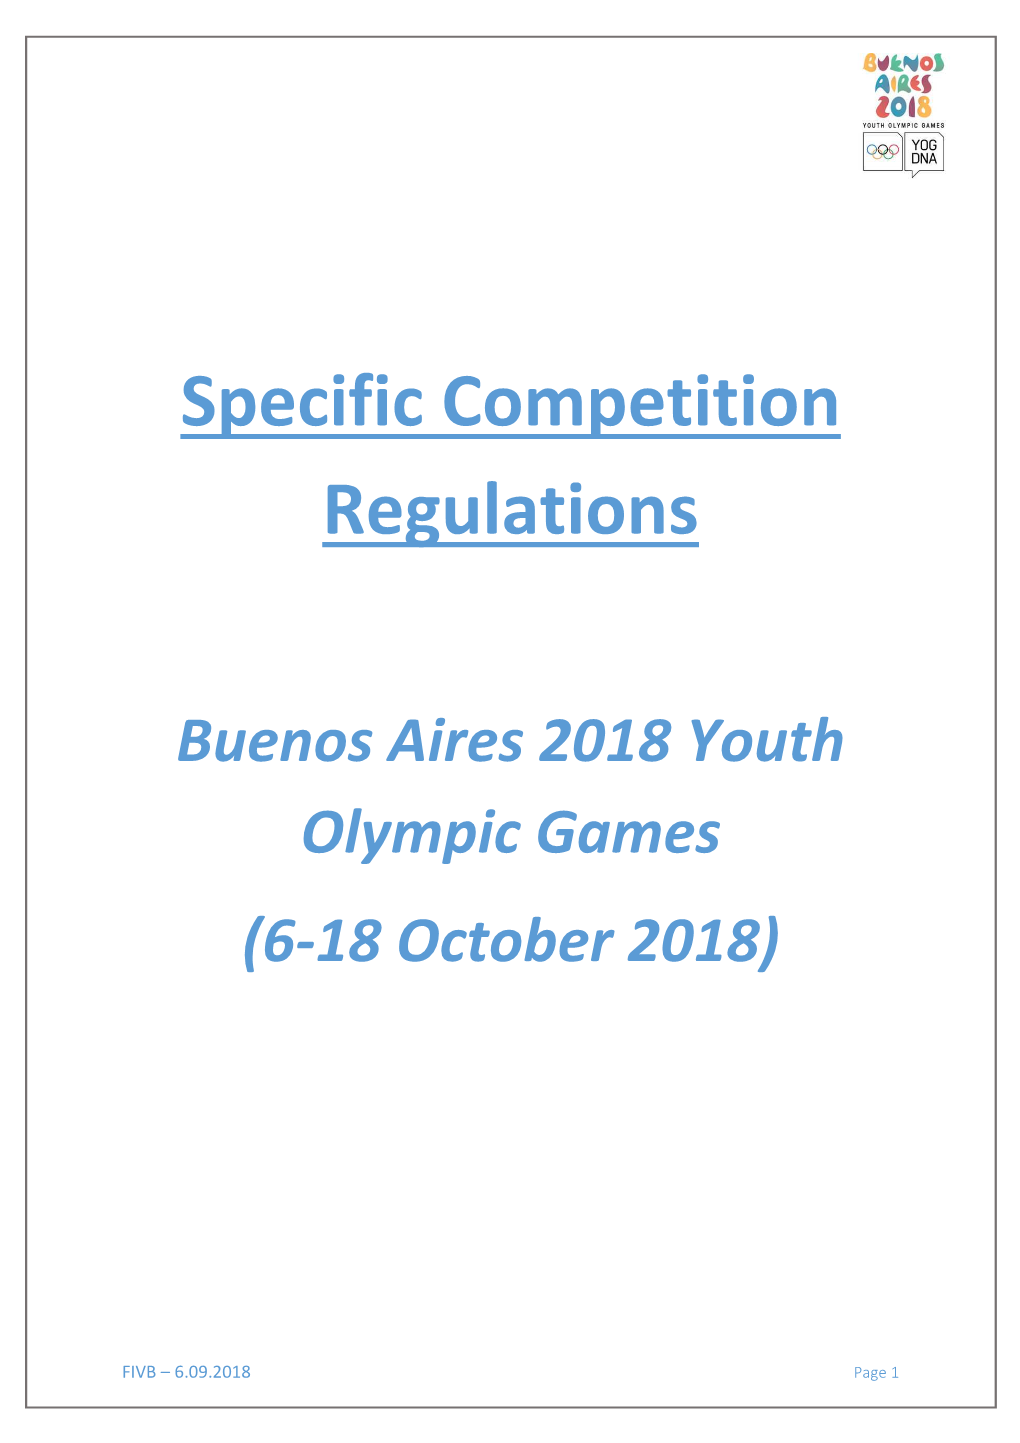 Specific Competition Regulations